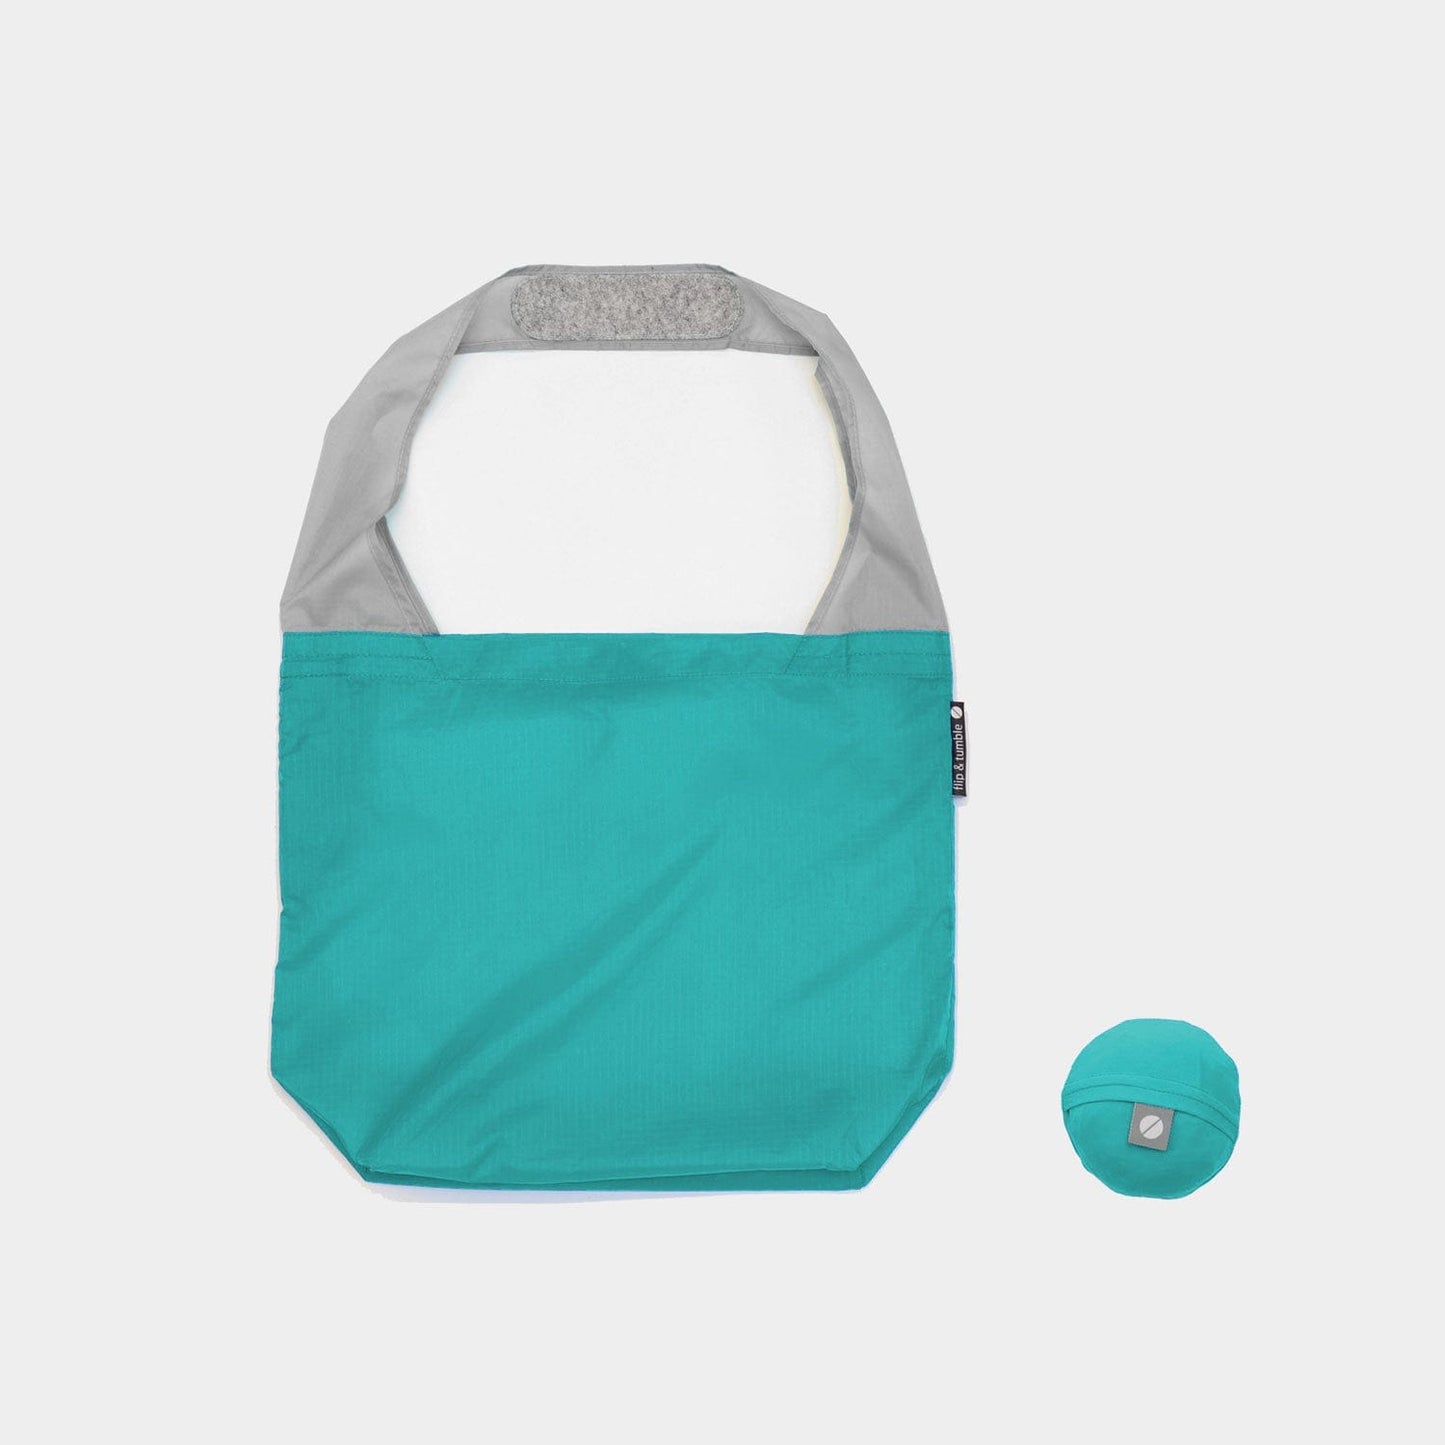 24-7 bag - flip & tumble - teal packable tote, stylish reusable bag, great with reusable mesh bags